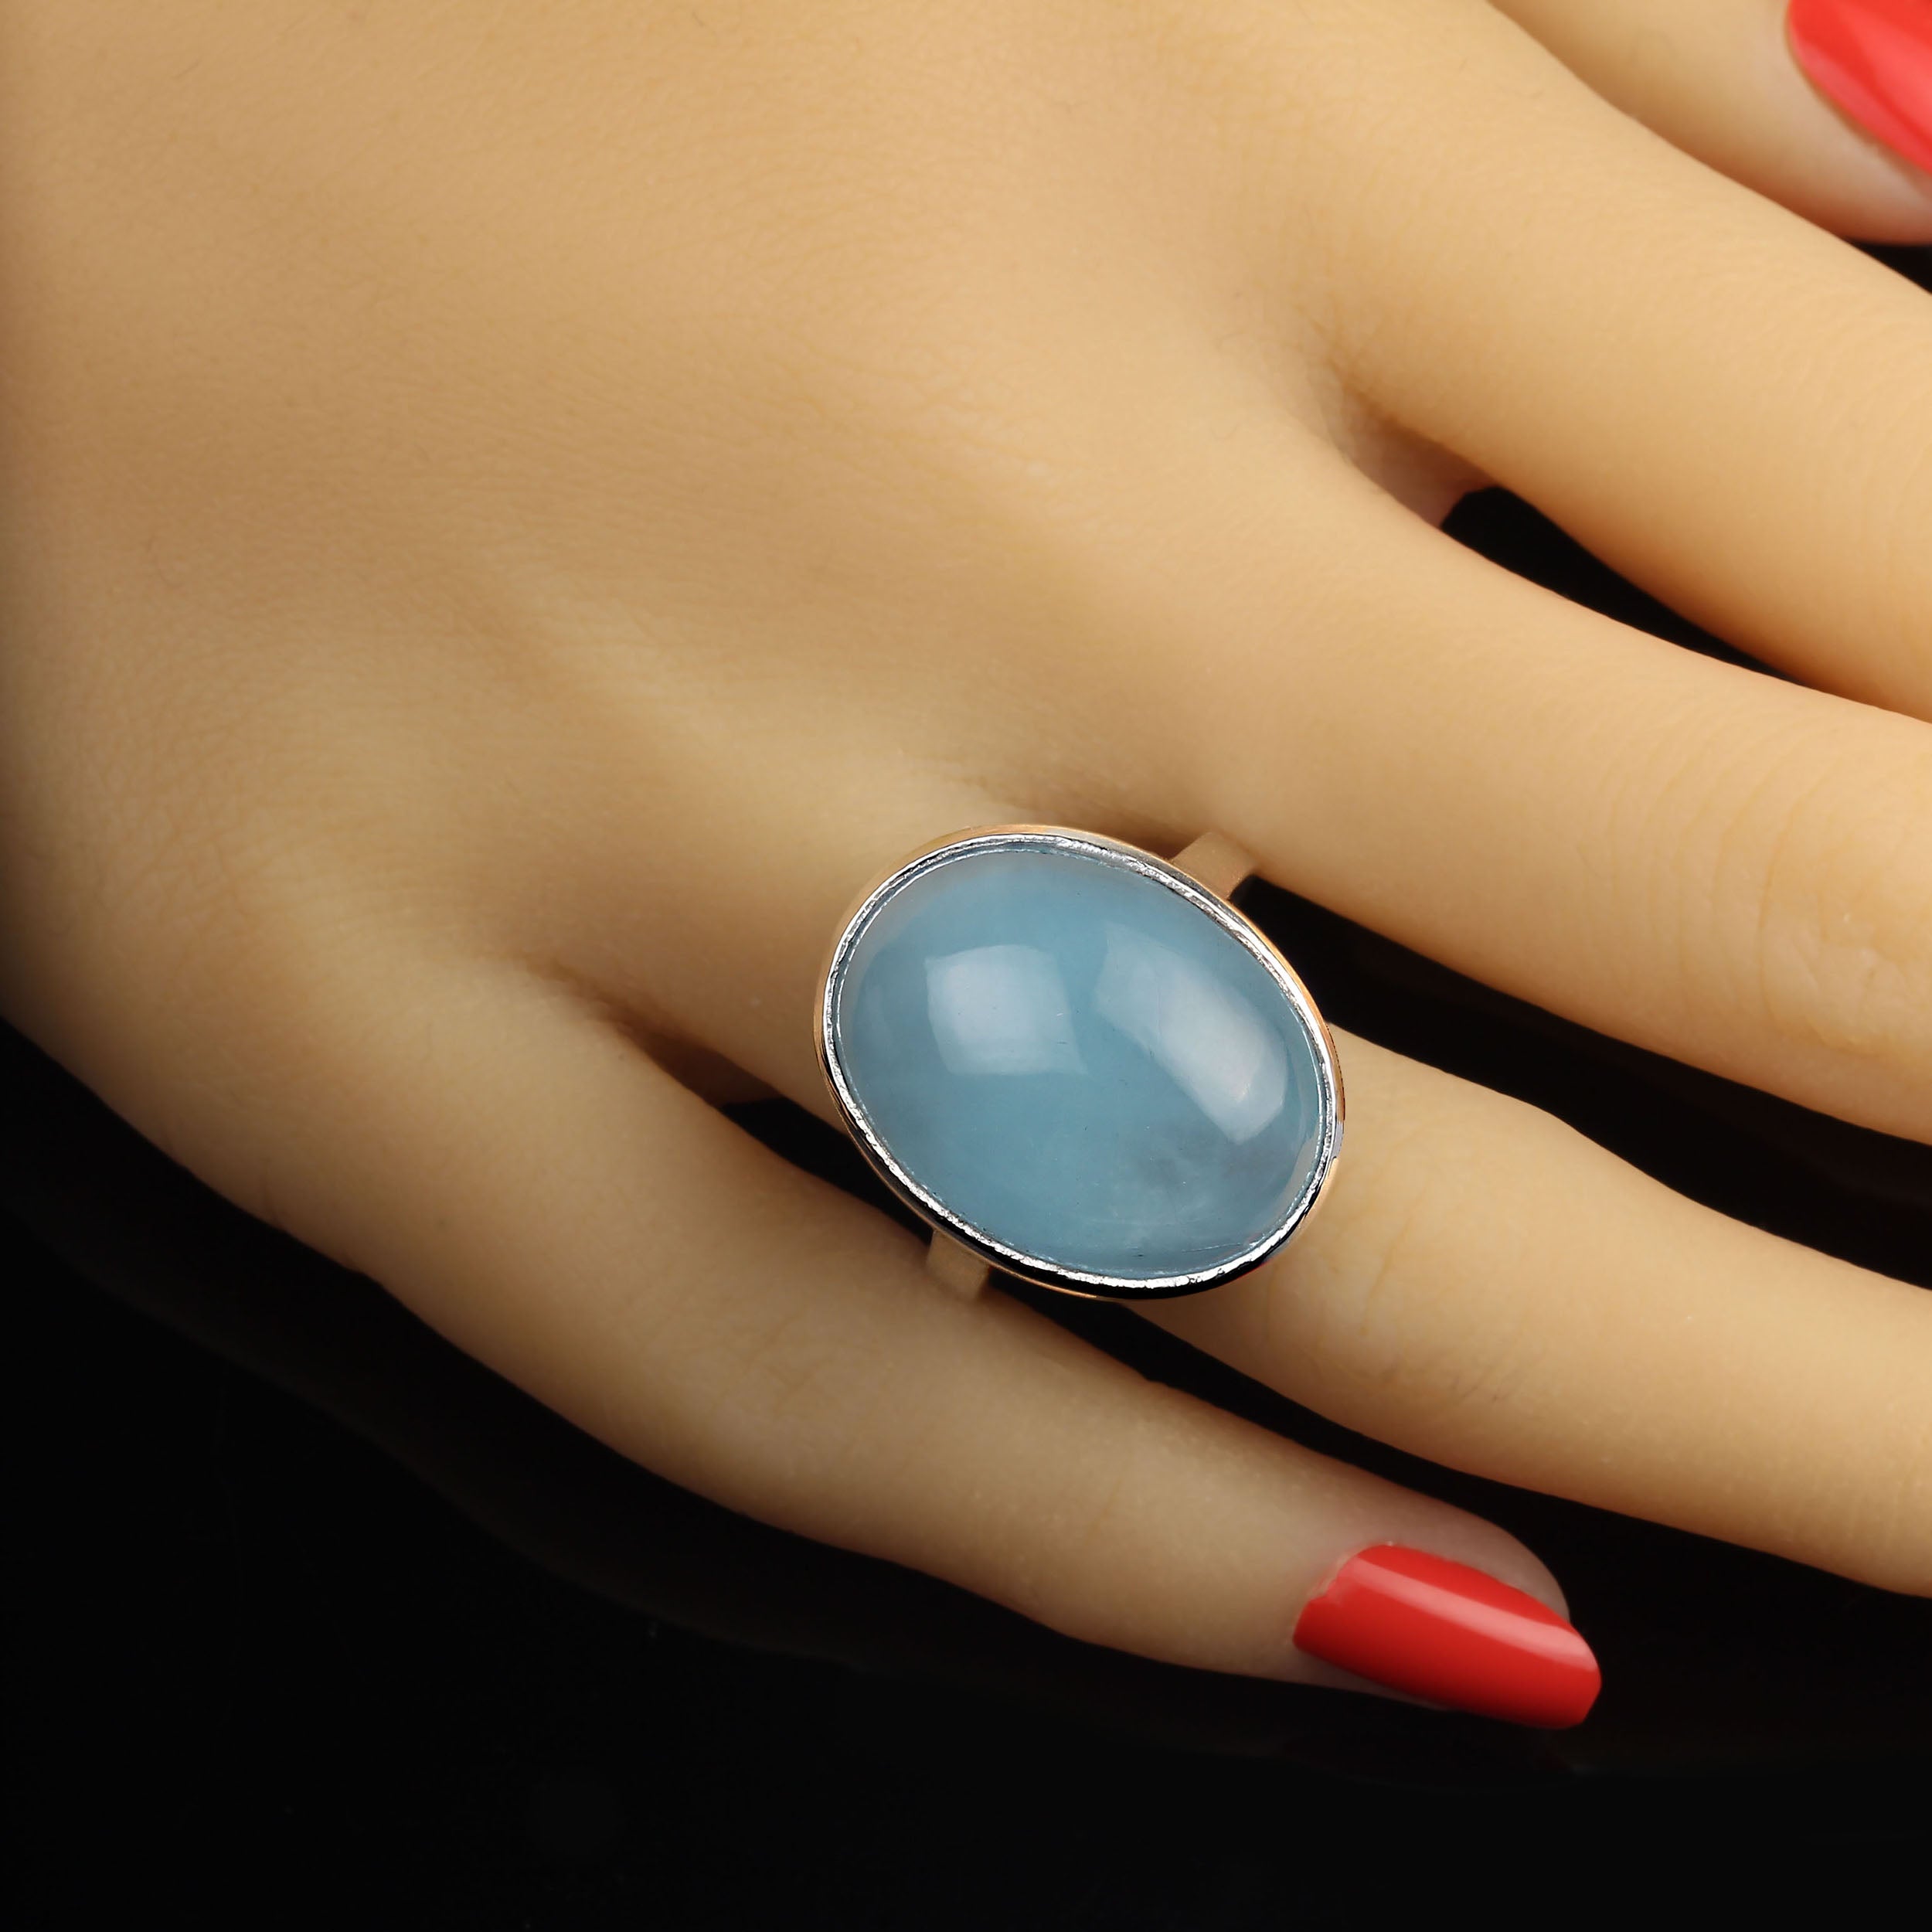 AJD 24 Carat  Aquamarine Cabochon in Sterling Silver Ring    March Birthstone! For Sale